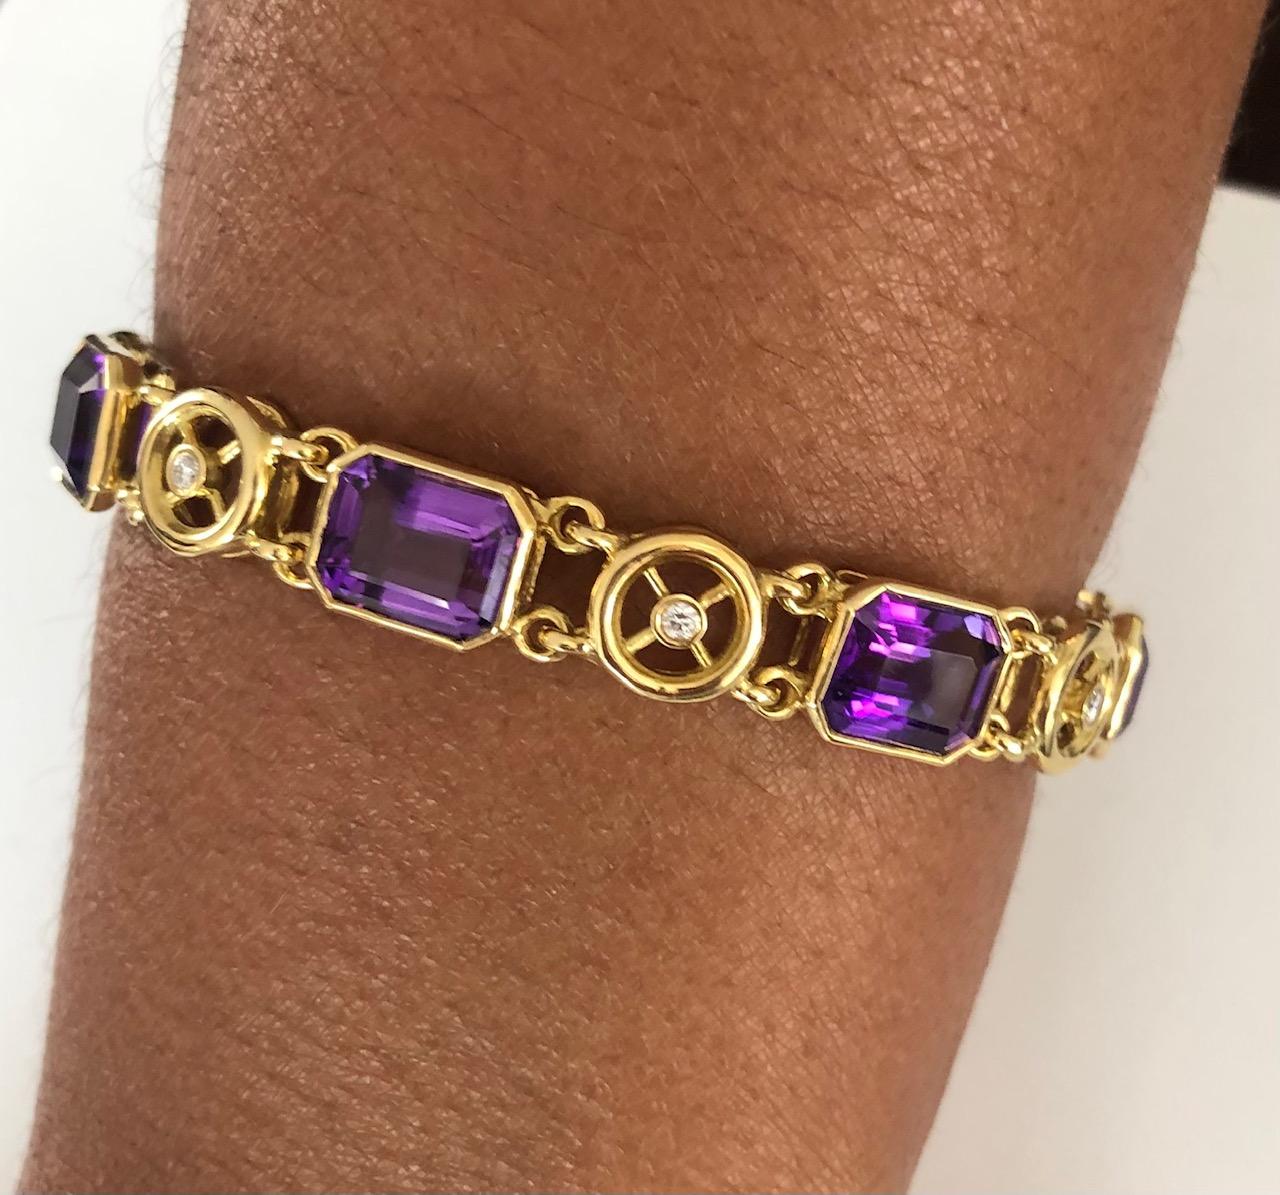 Great design 18k Yellow Gold Bracelet, set with 7 round Diamonds 0.21 carats and 7 Emerald Cut Amethysts 20.00 carats.

We design and manufacture our jewelry in our workshop, located in New York City's diamond district.